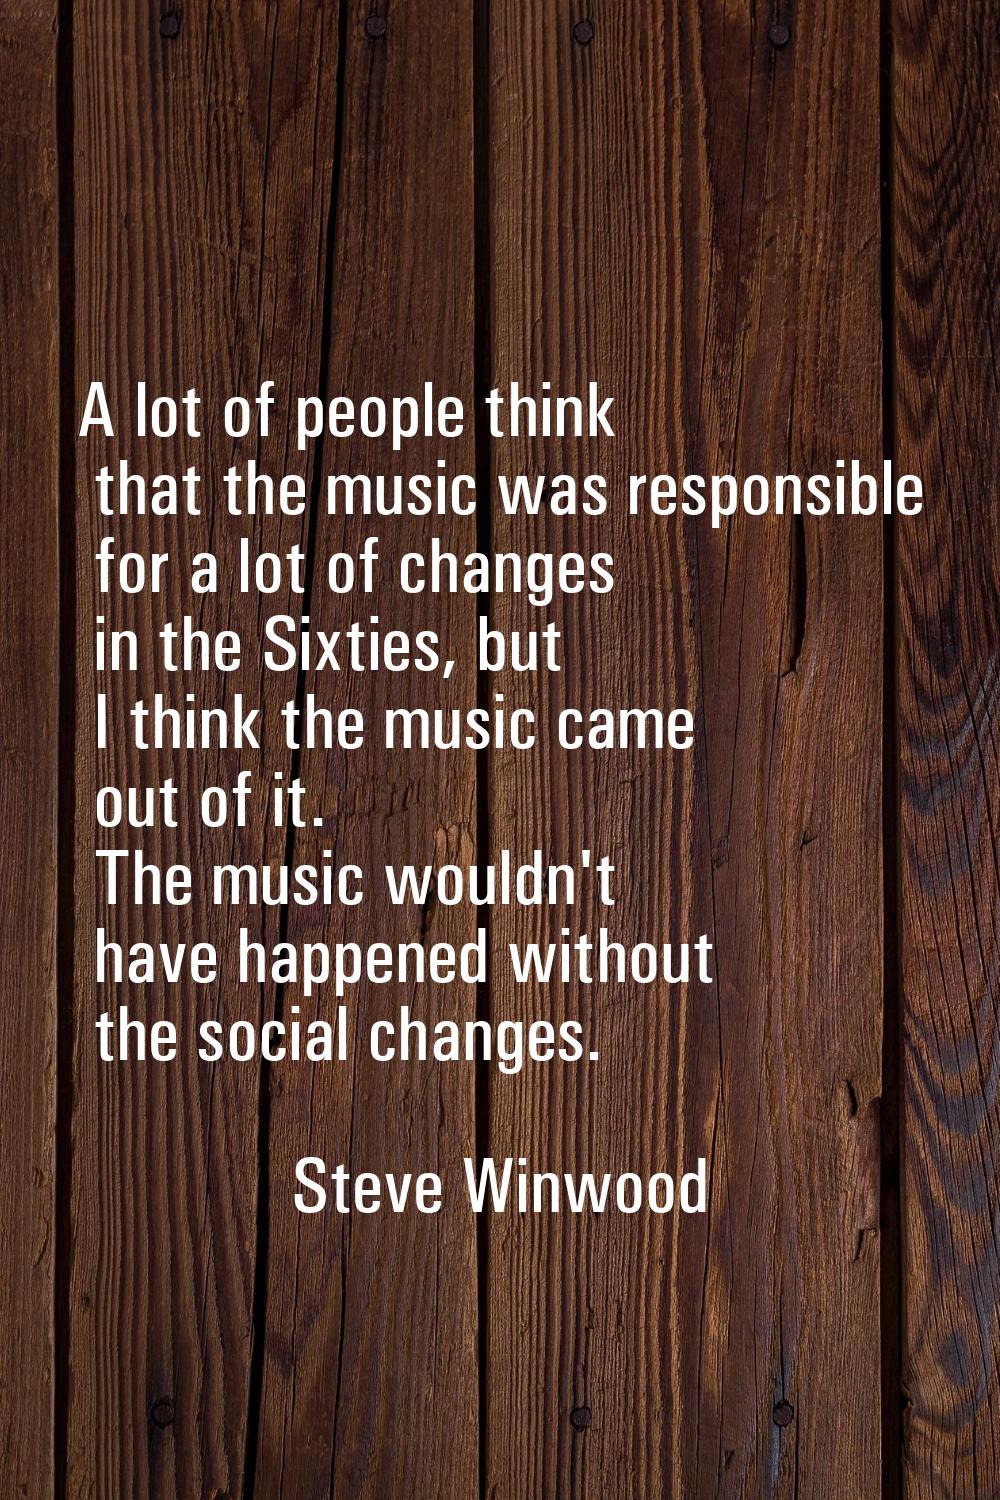 A lot of people think that the music was responsible for a lot of changes in the Sixties, but I thi